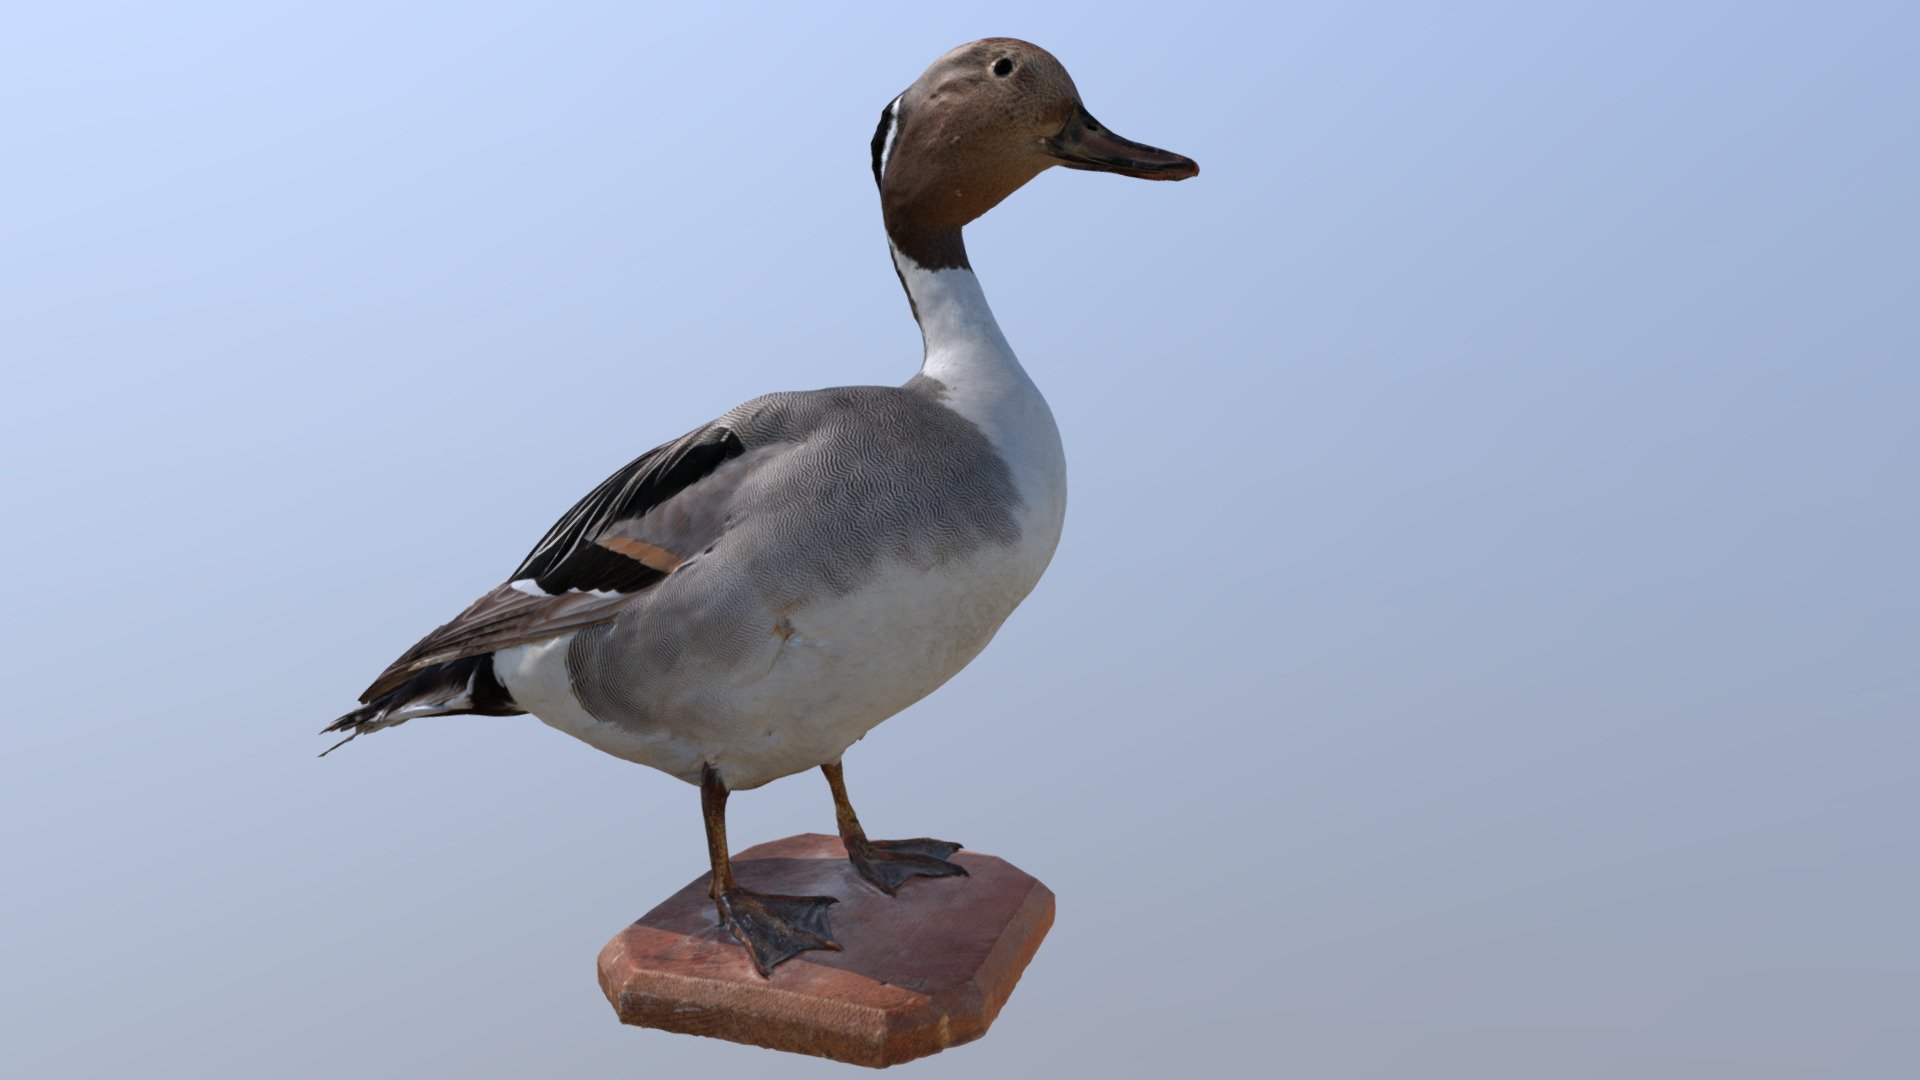 An antique taxidermic mount of the Northern pintail, Anas acuta, a migratory duck 3d model